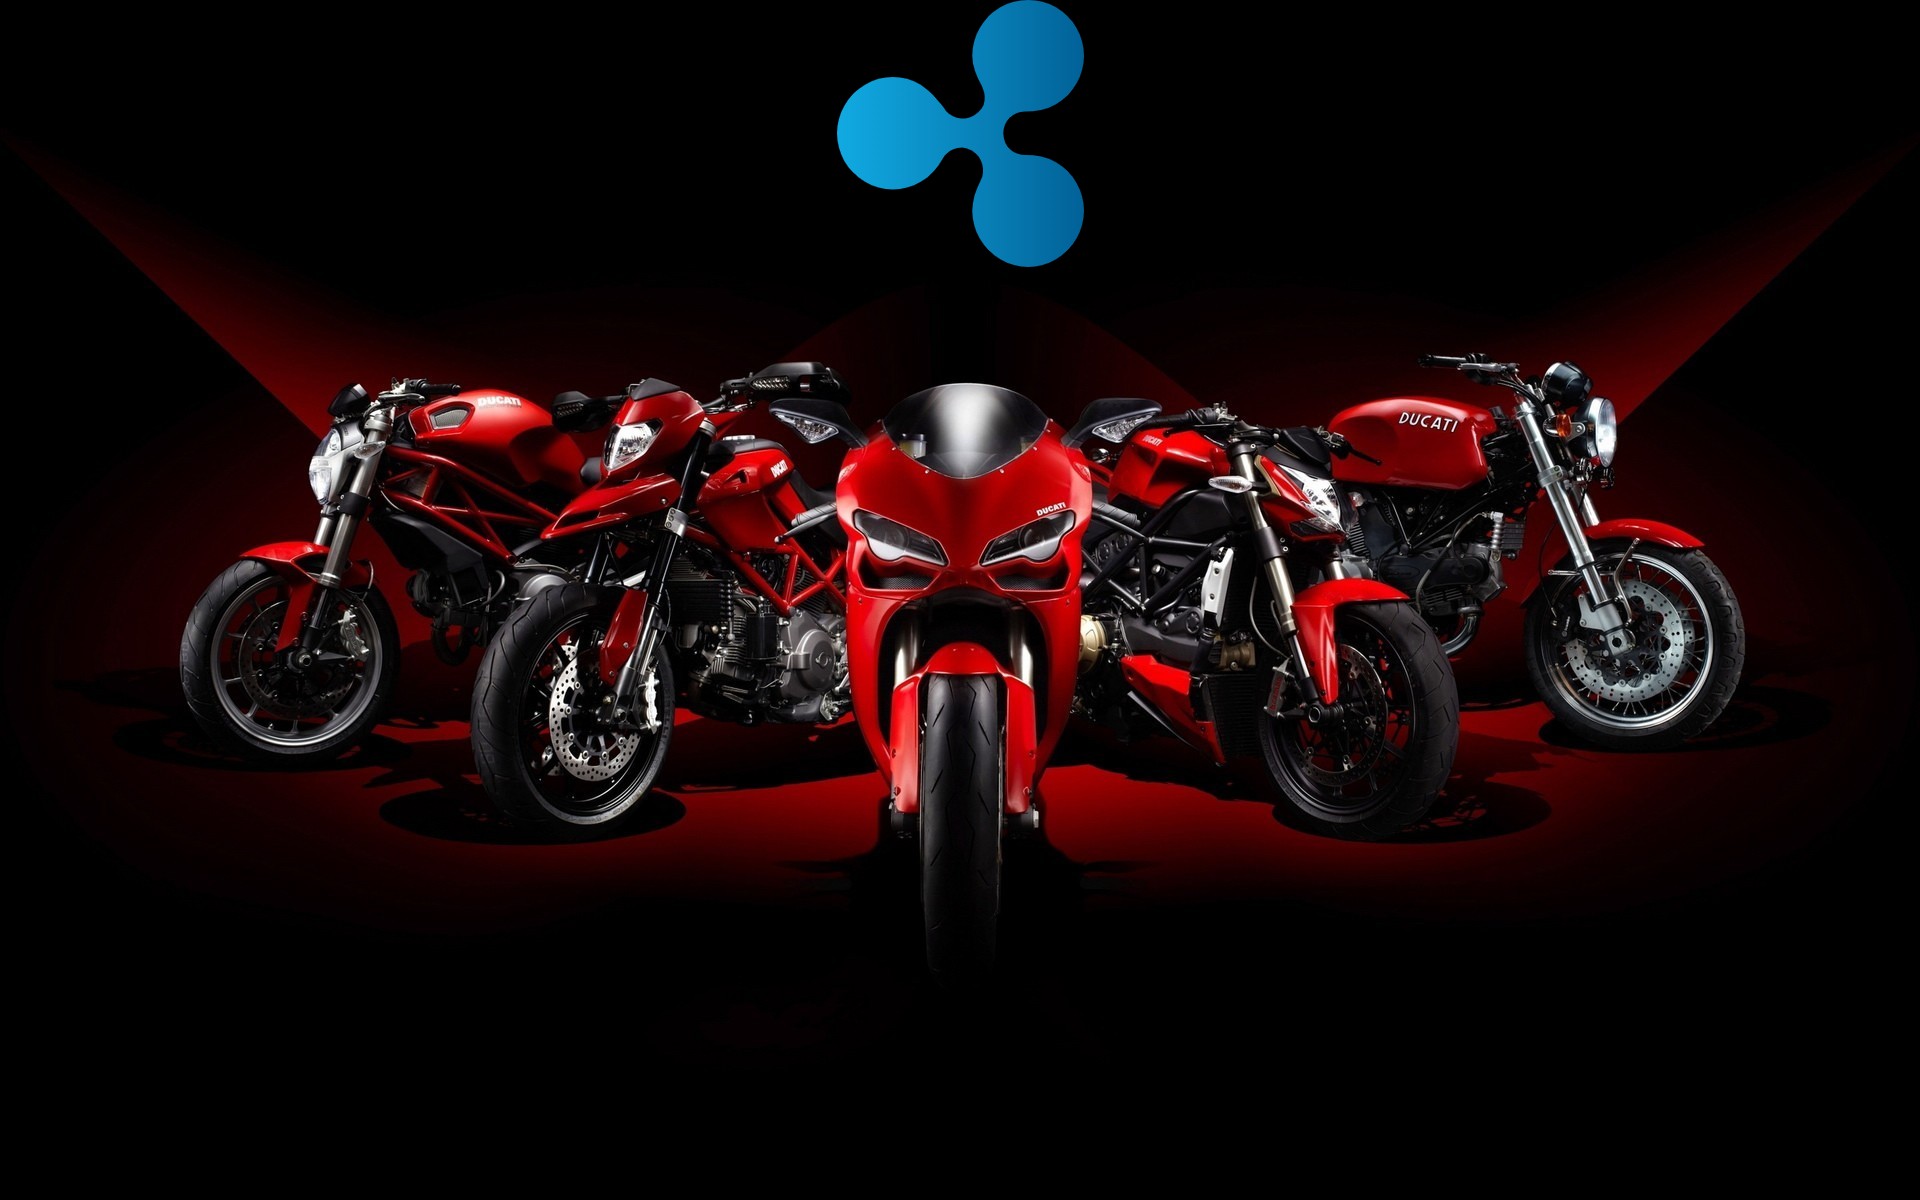 Ducati launches the first NFT collection in collaboration with Ripple